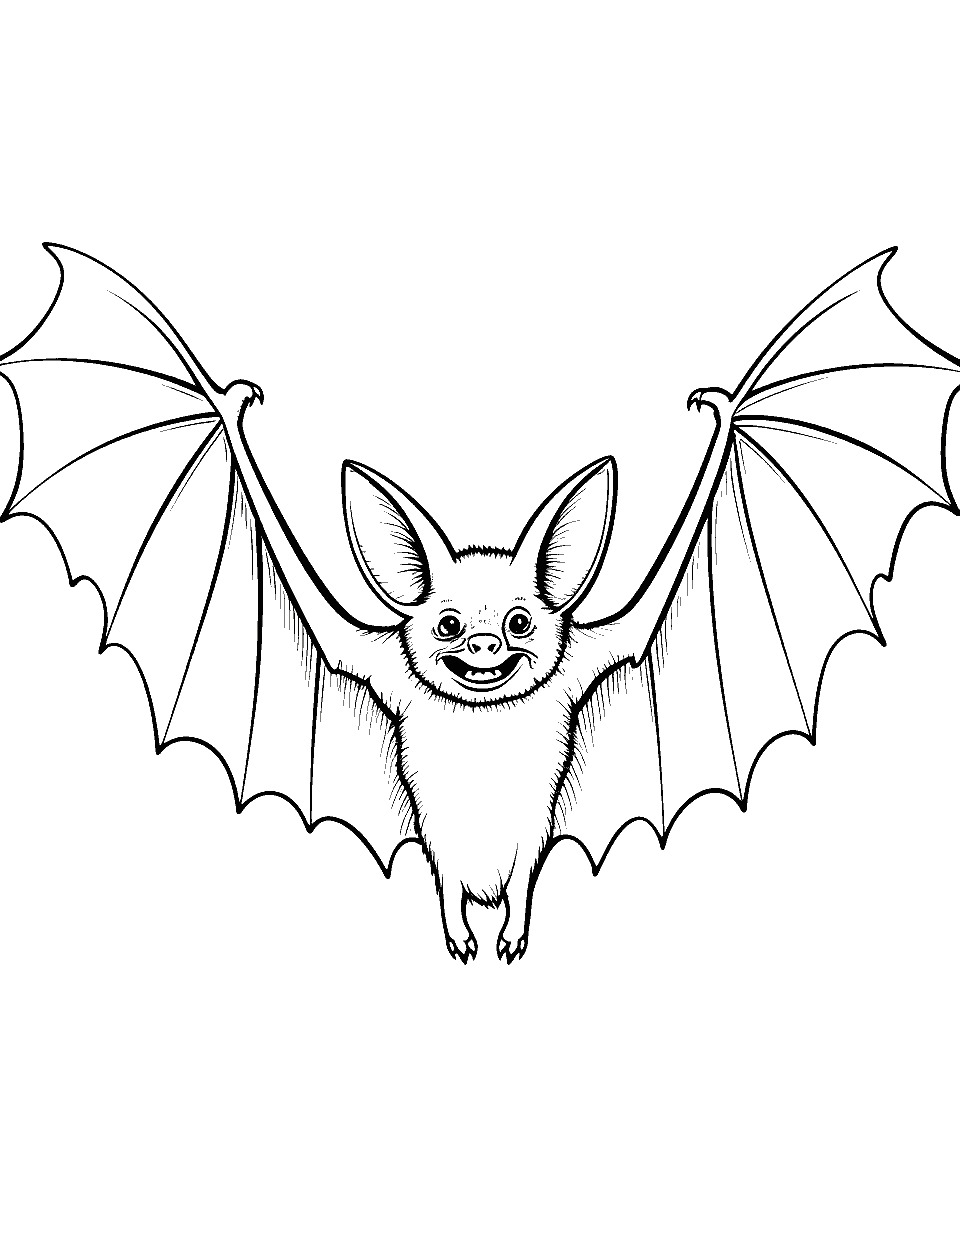 Realistic Bat in Flight Coloring Page - A detailed drawing of a bat with its wings fully spread.